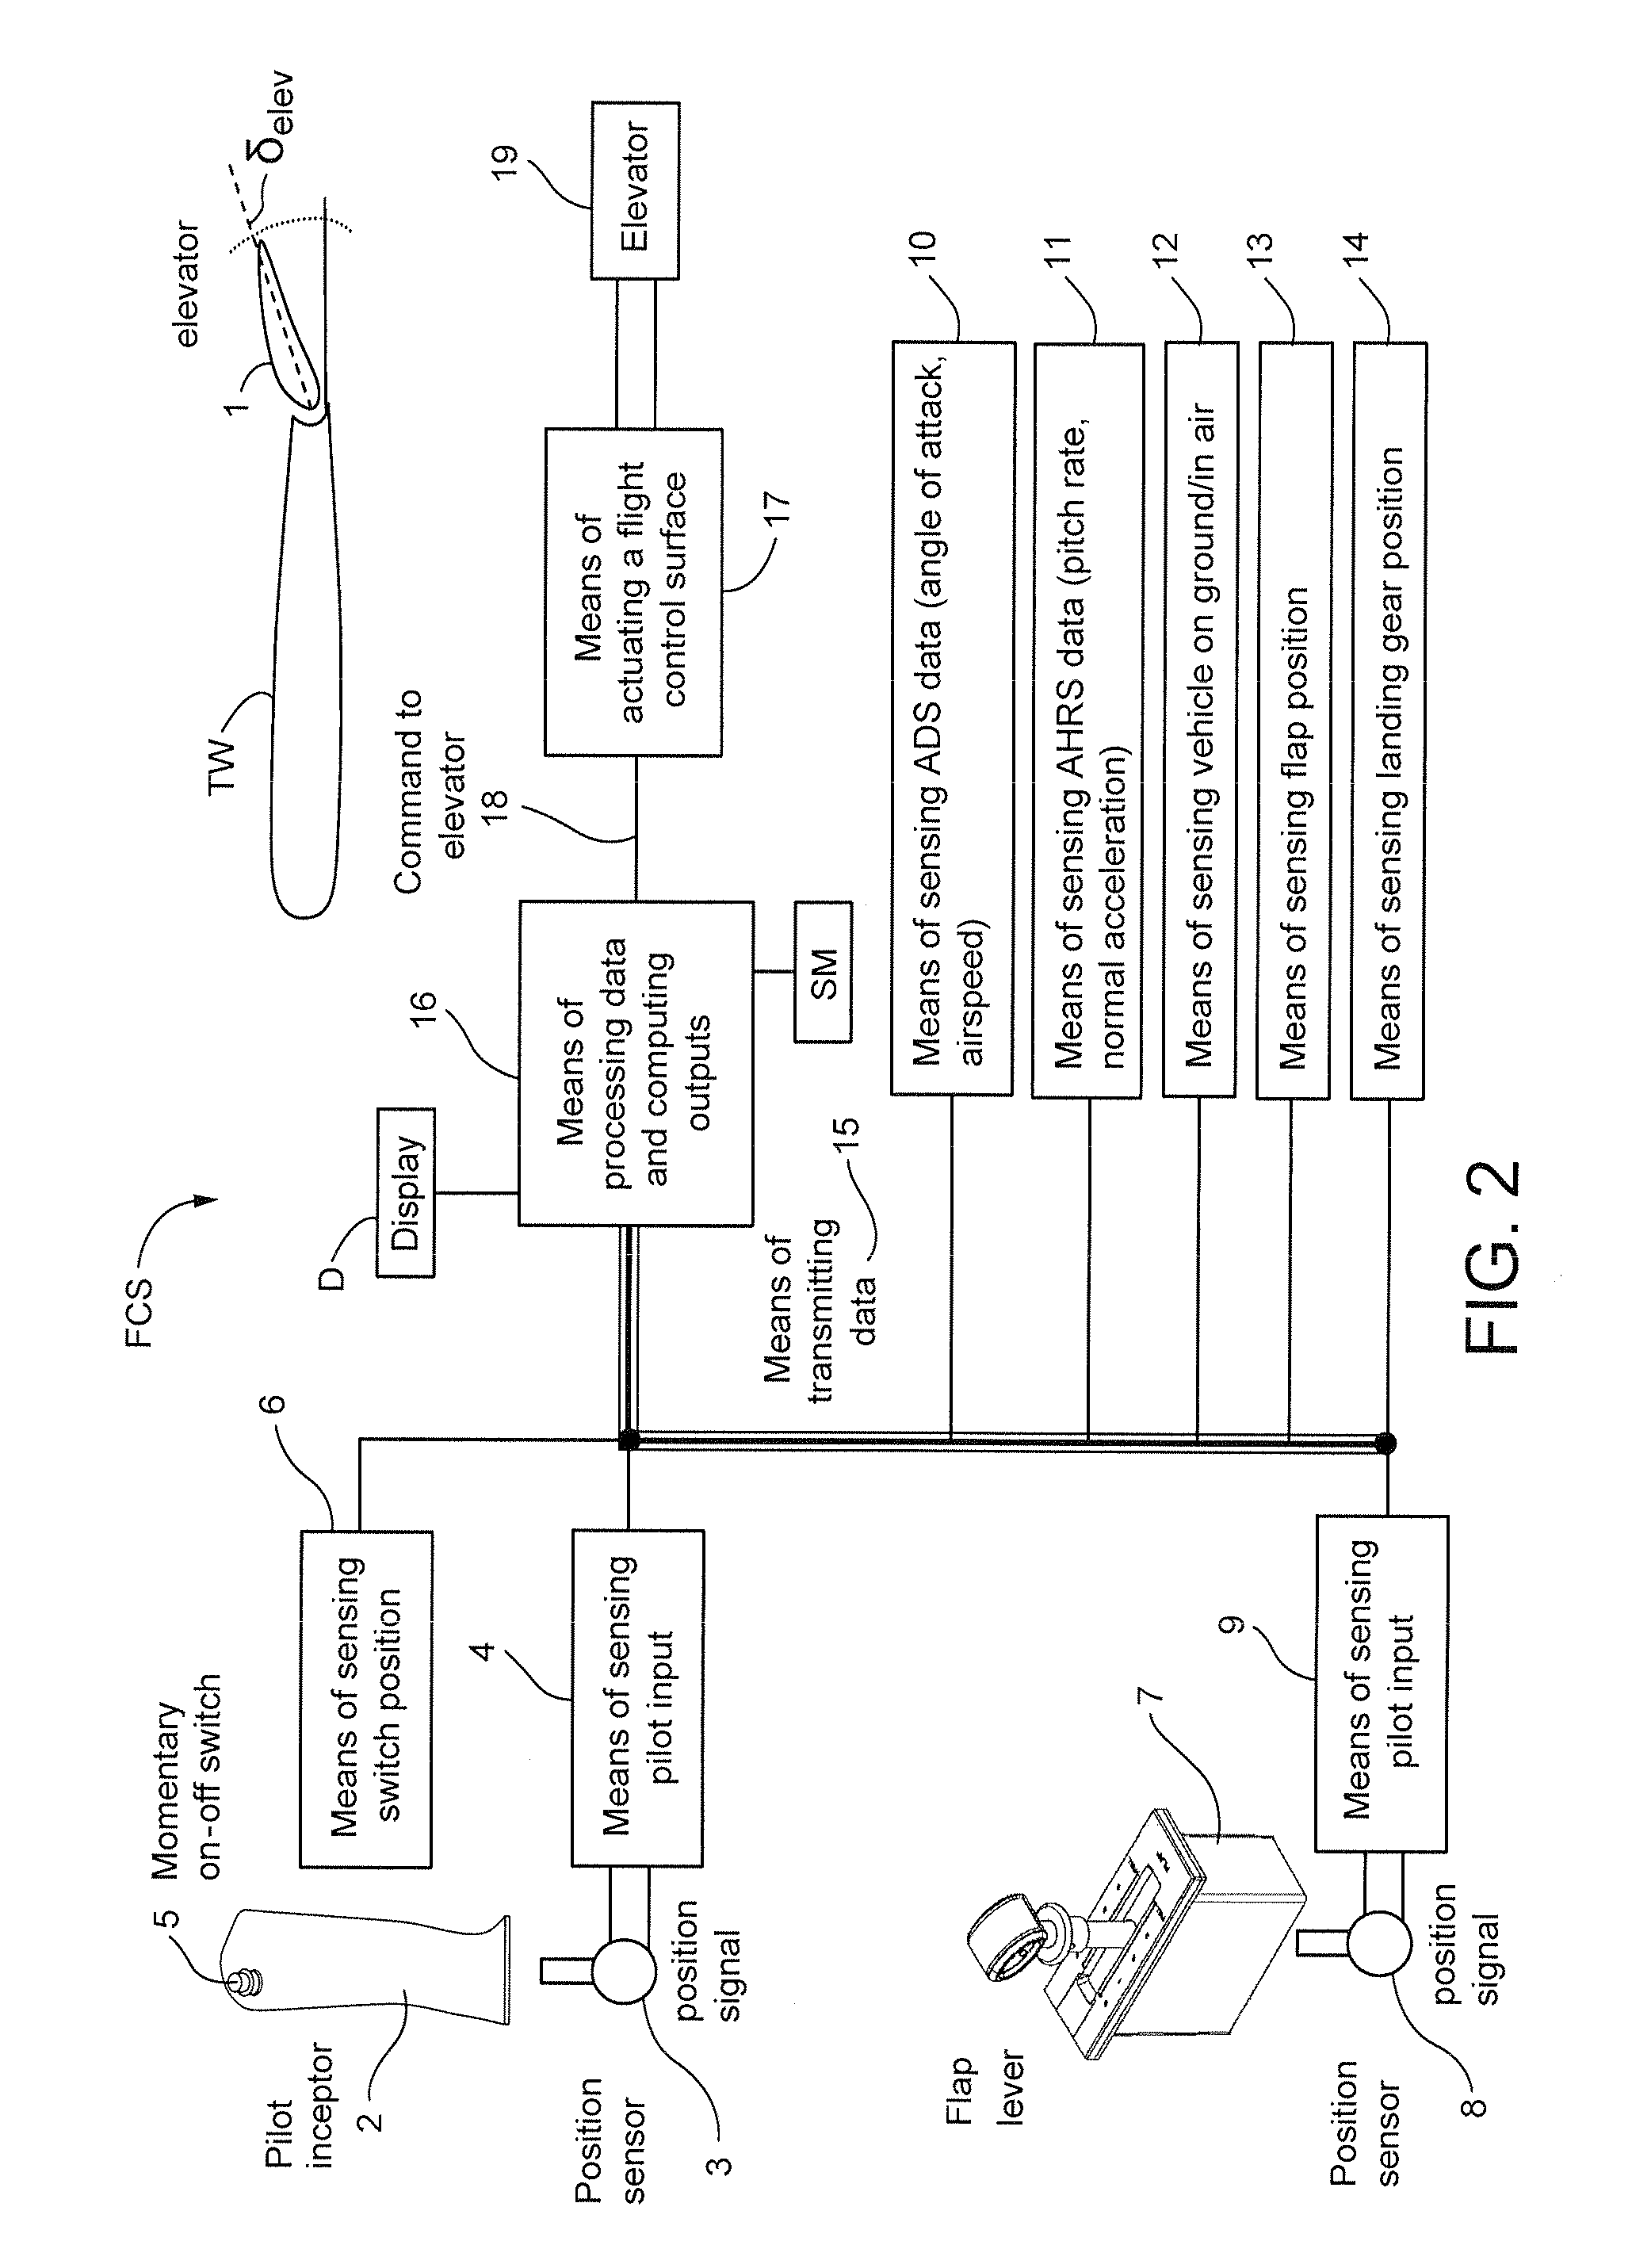 Flight Control System Mode And Method Providing Aircraft Speed Control Through The Usage Of Momentary On-Off Control